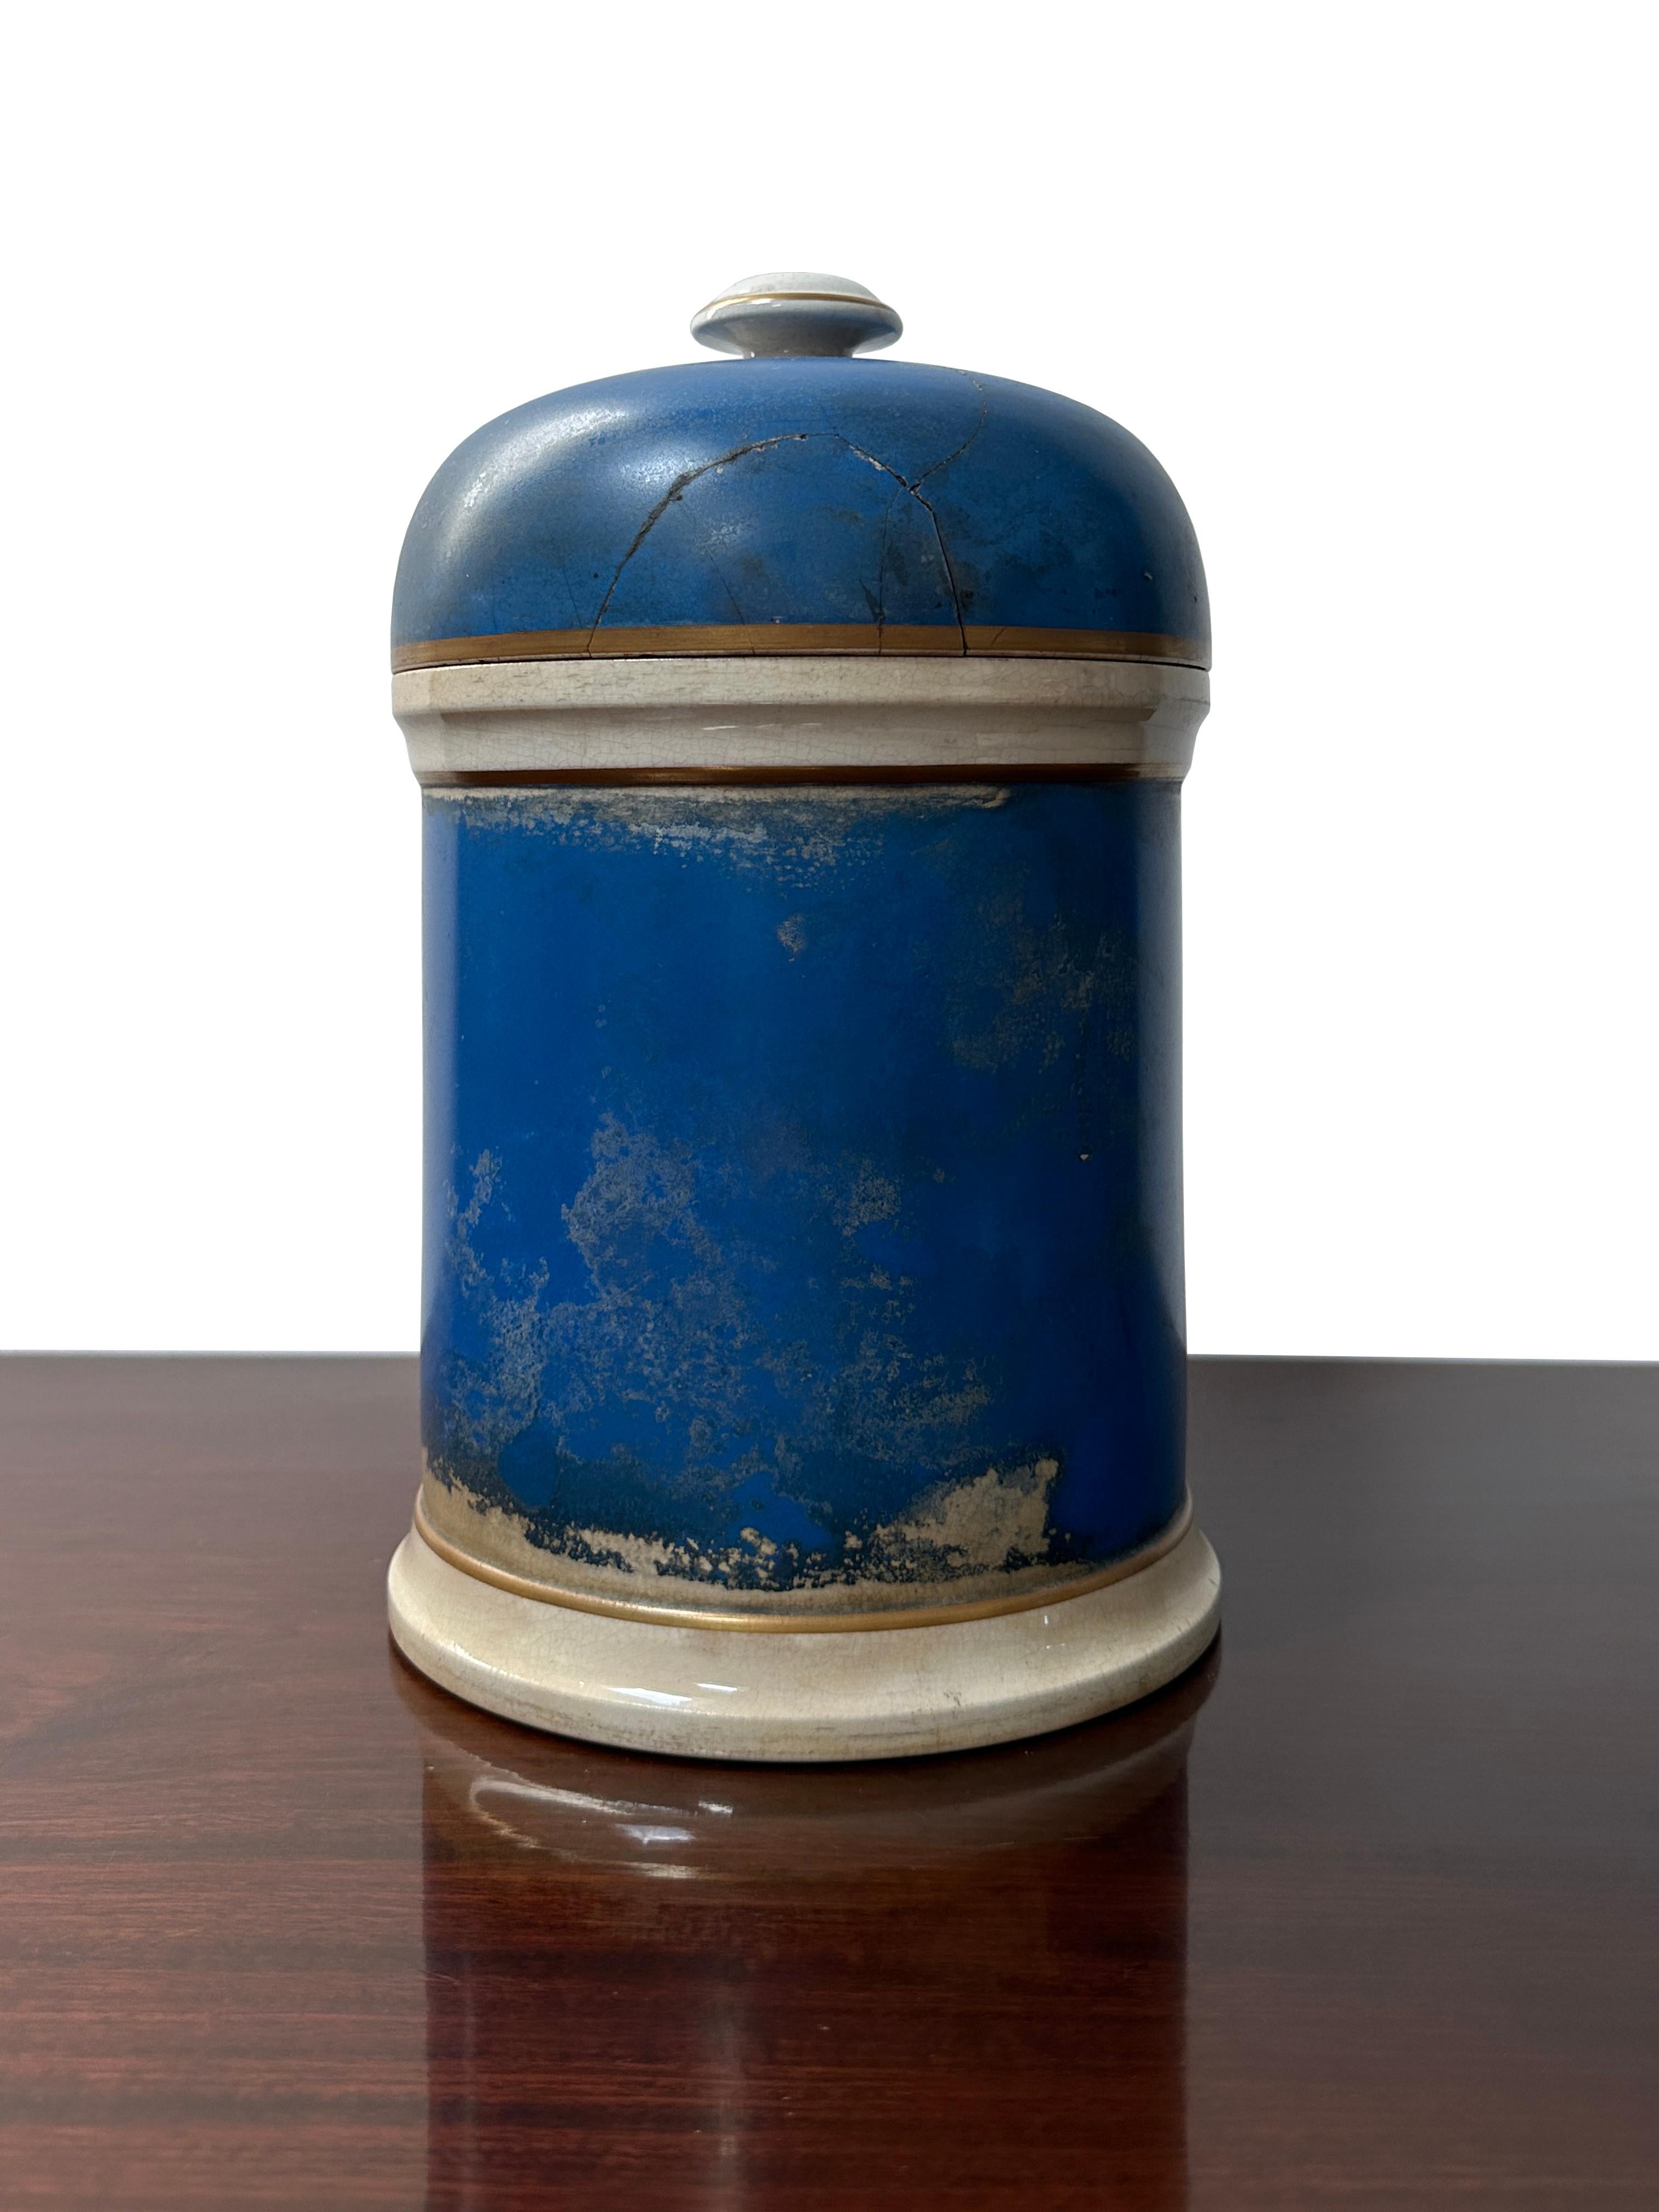 Antique Vintage Victorian Hand Painted Apothecary Shop Display Jar Bottle Vase In Good Condition For Sale In Sale, GB